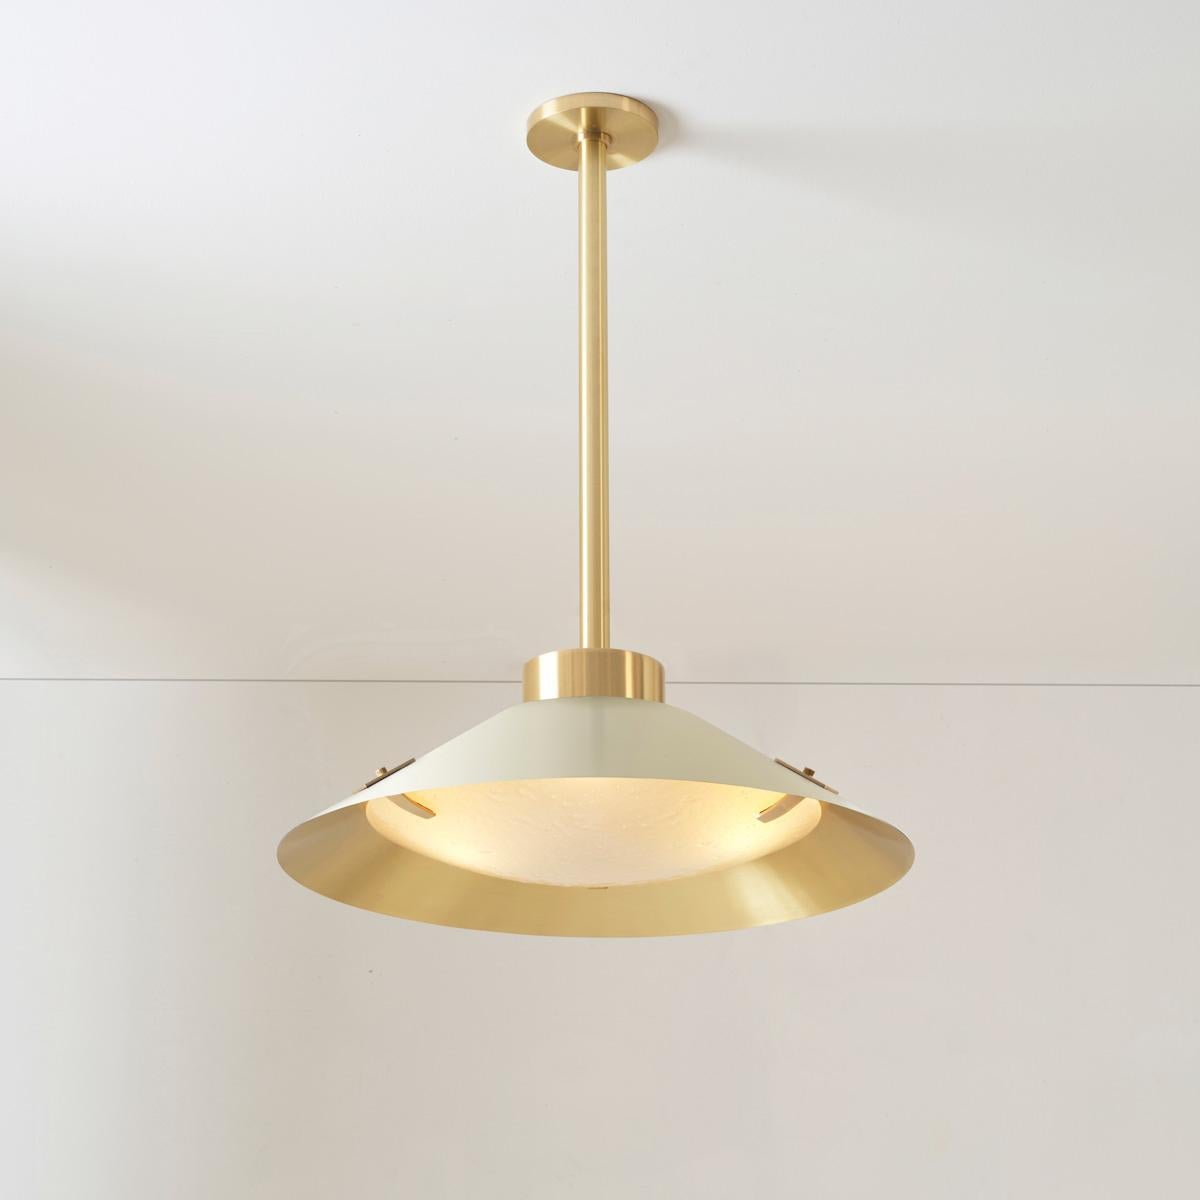 Kono Pendant by Gaspare Asaro. Satin Brass and Stone Grey For Sale 6